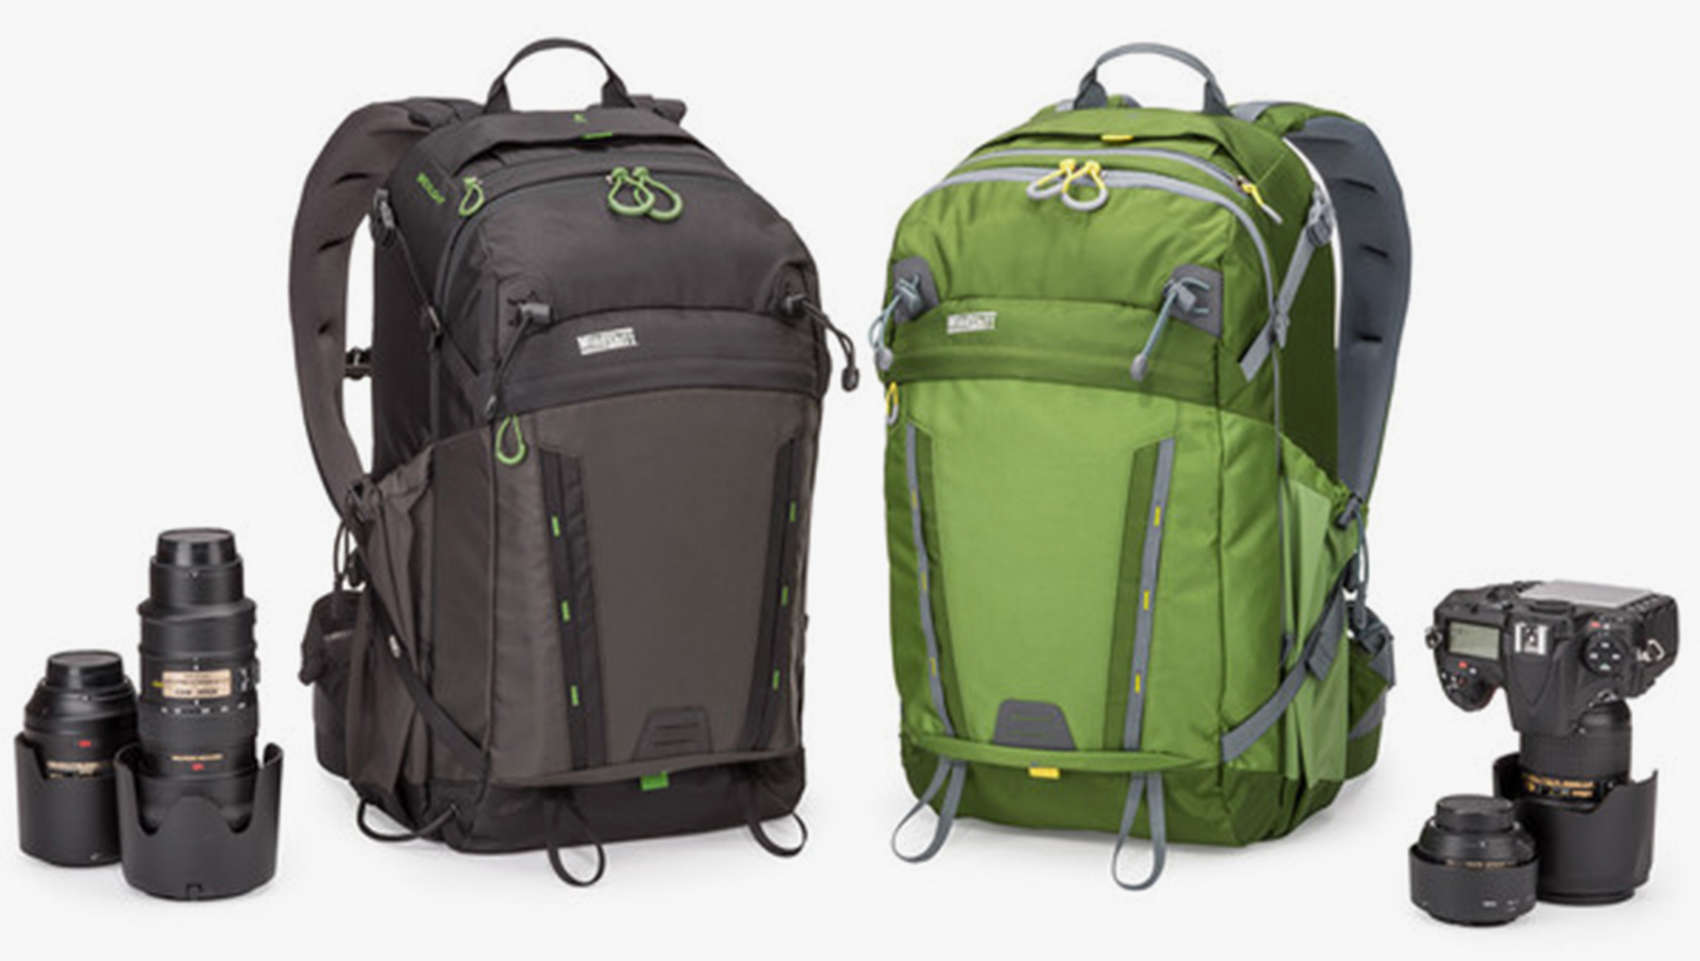 The BackLight 26L comes in two colors and provides gear access without removing the pack.